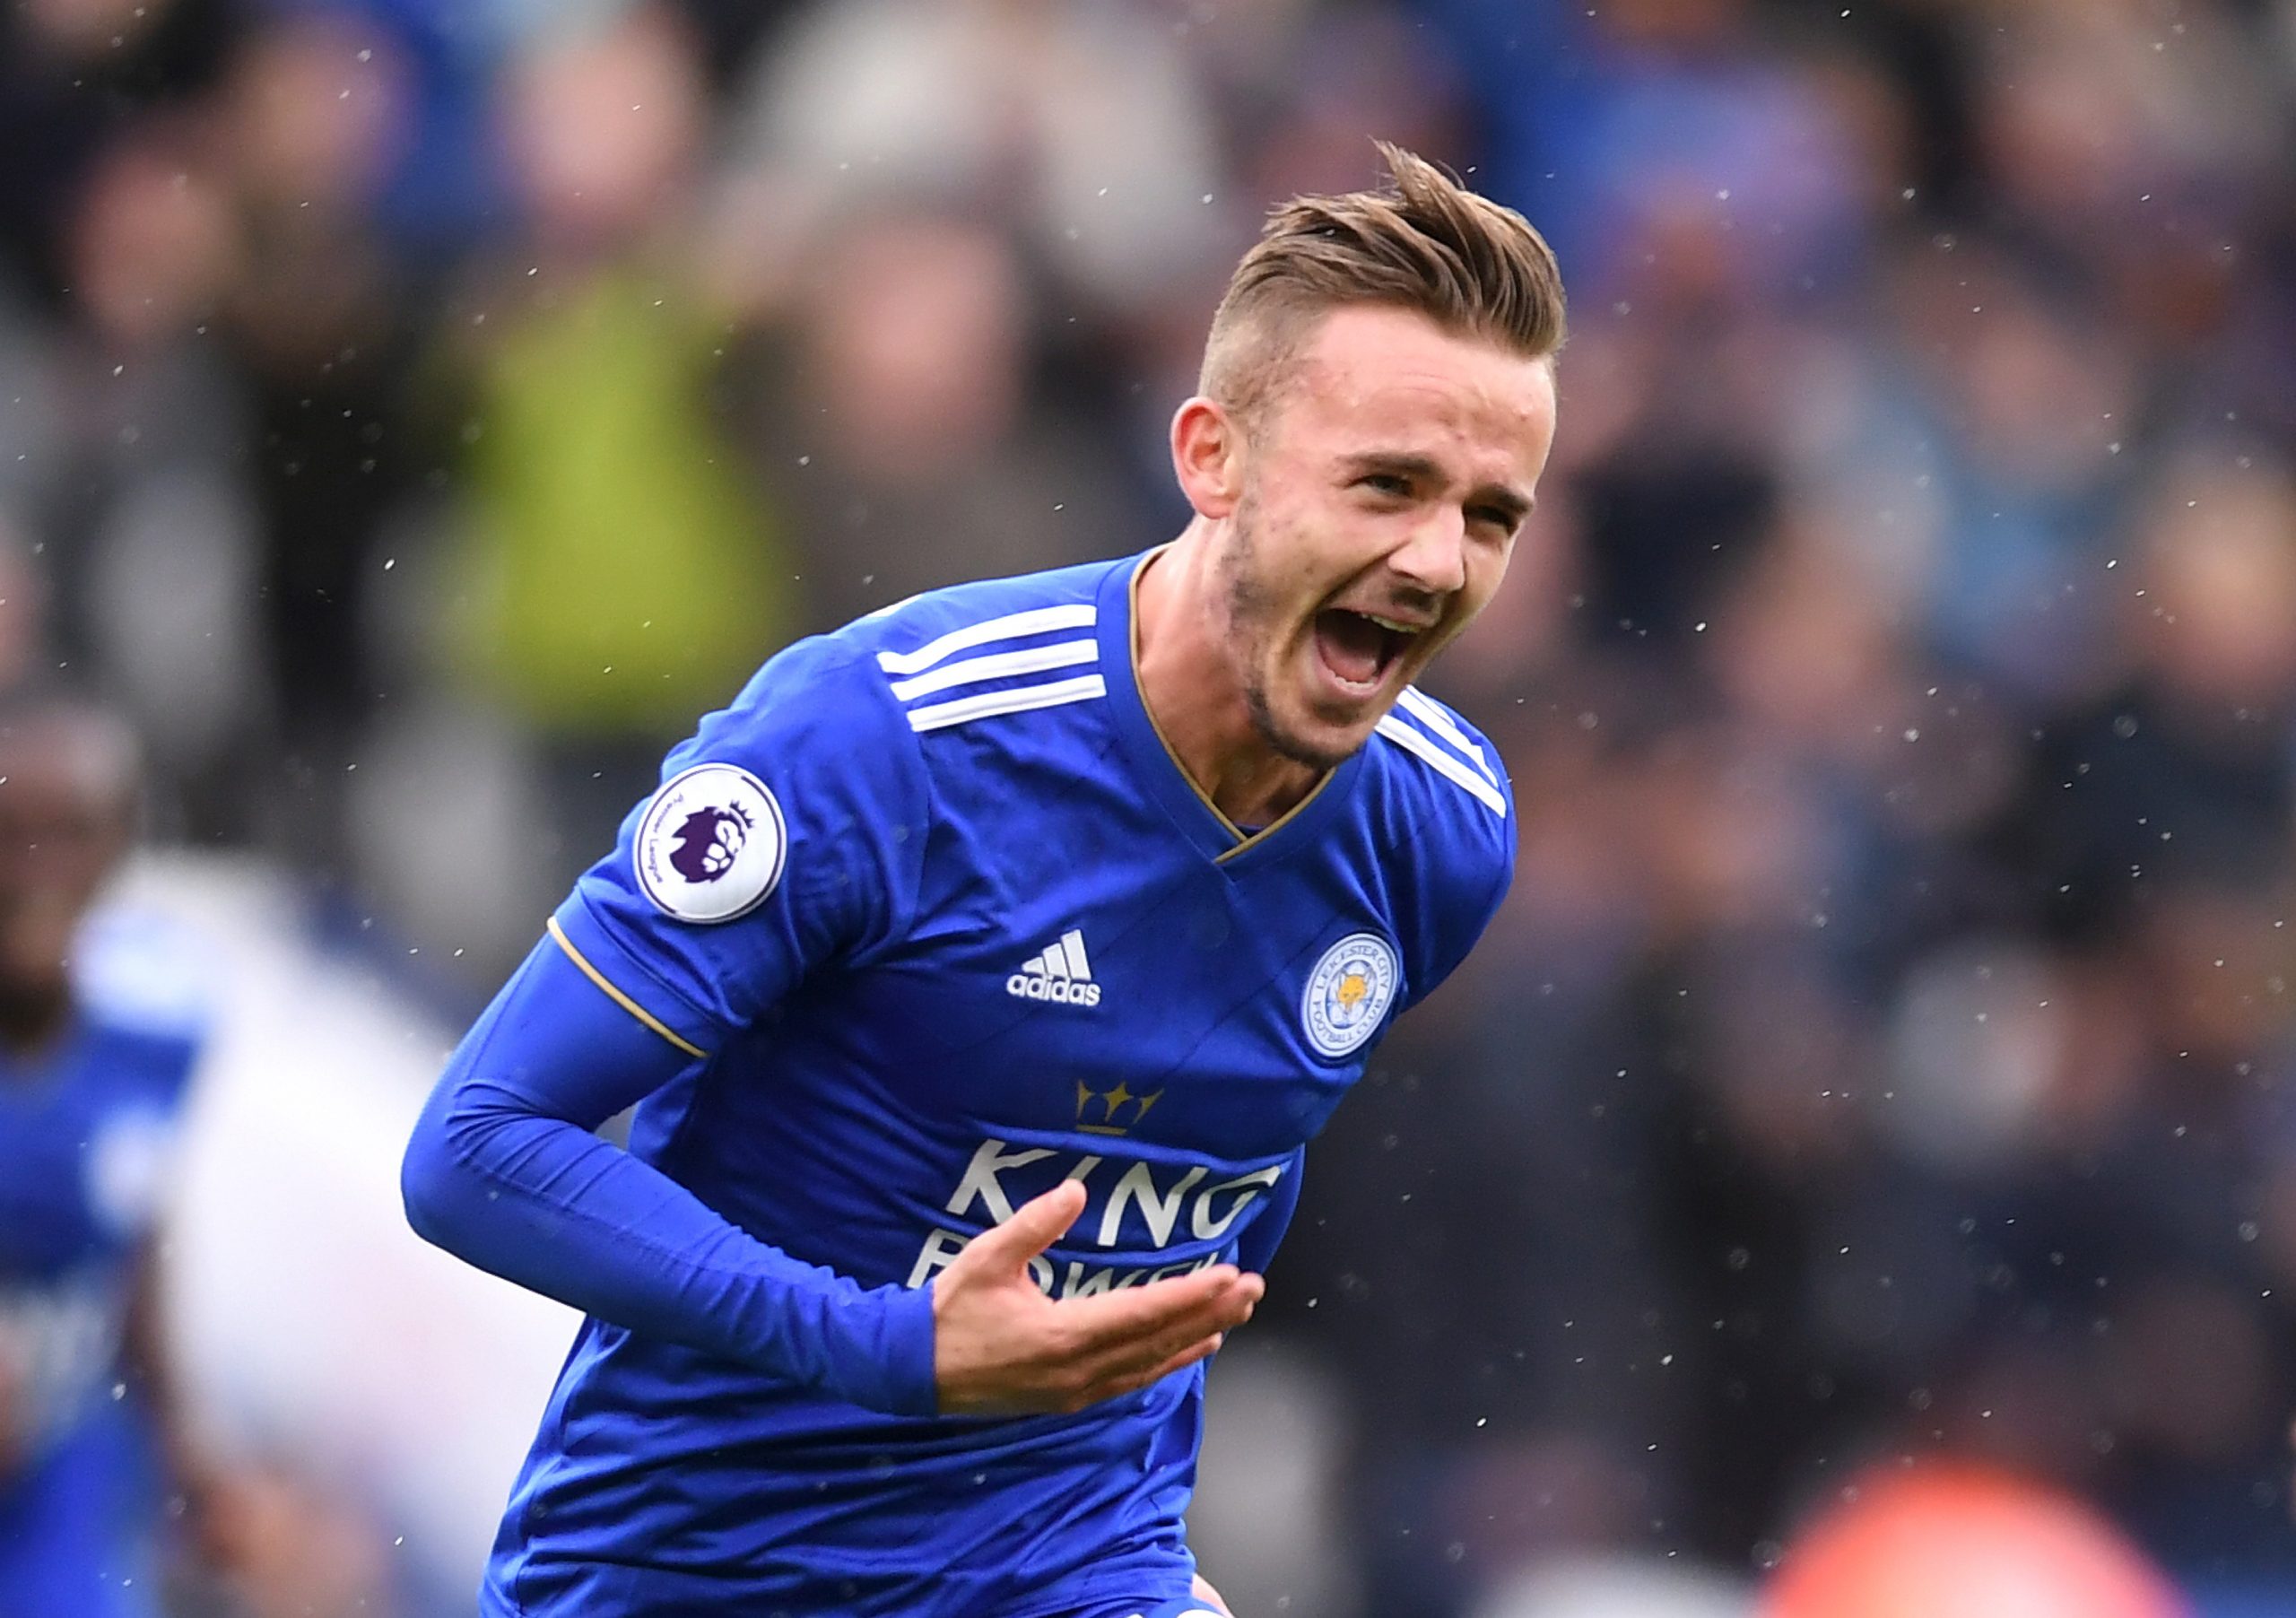 LEICESTER, ENGLAND - SEPTEMBER 22: James Maddison of Leicester City celebrates after scoring his team's second goal during the Premier League match between Leicester City and Huddersfield Town at The King Power Stadium on September 22, 2018 in Leicester, United Kingdom. (Photo by Laurence Griffiths/Getty Images)